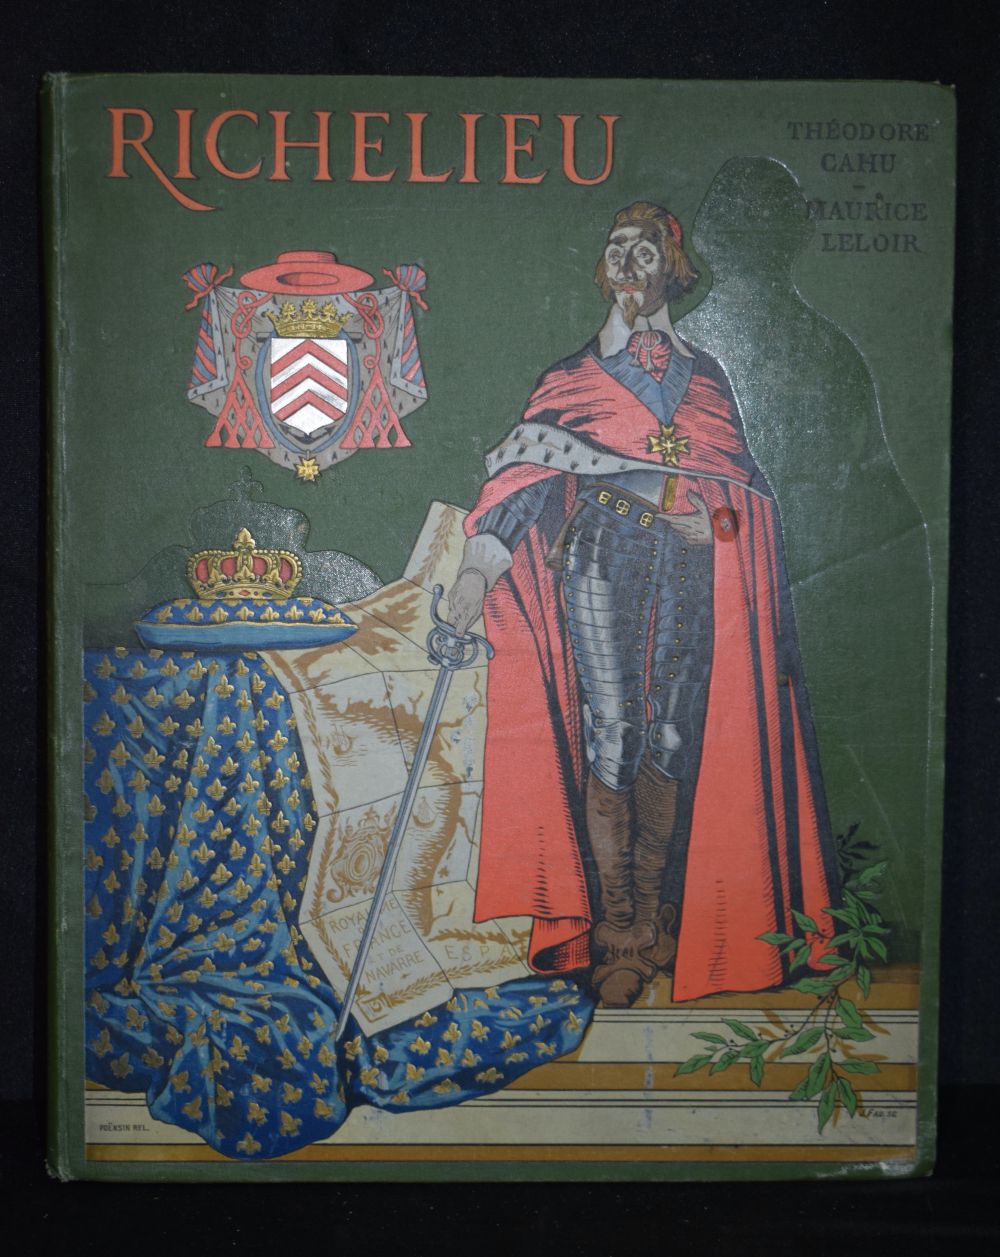 A Rare copy of " Richelieu " by Theodore CAHU , illustrated by Maurice Leloir published by - Image 7 of 10